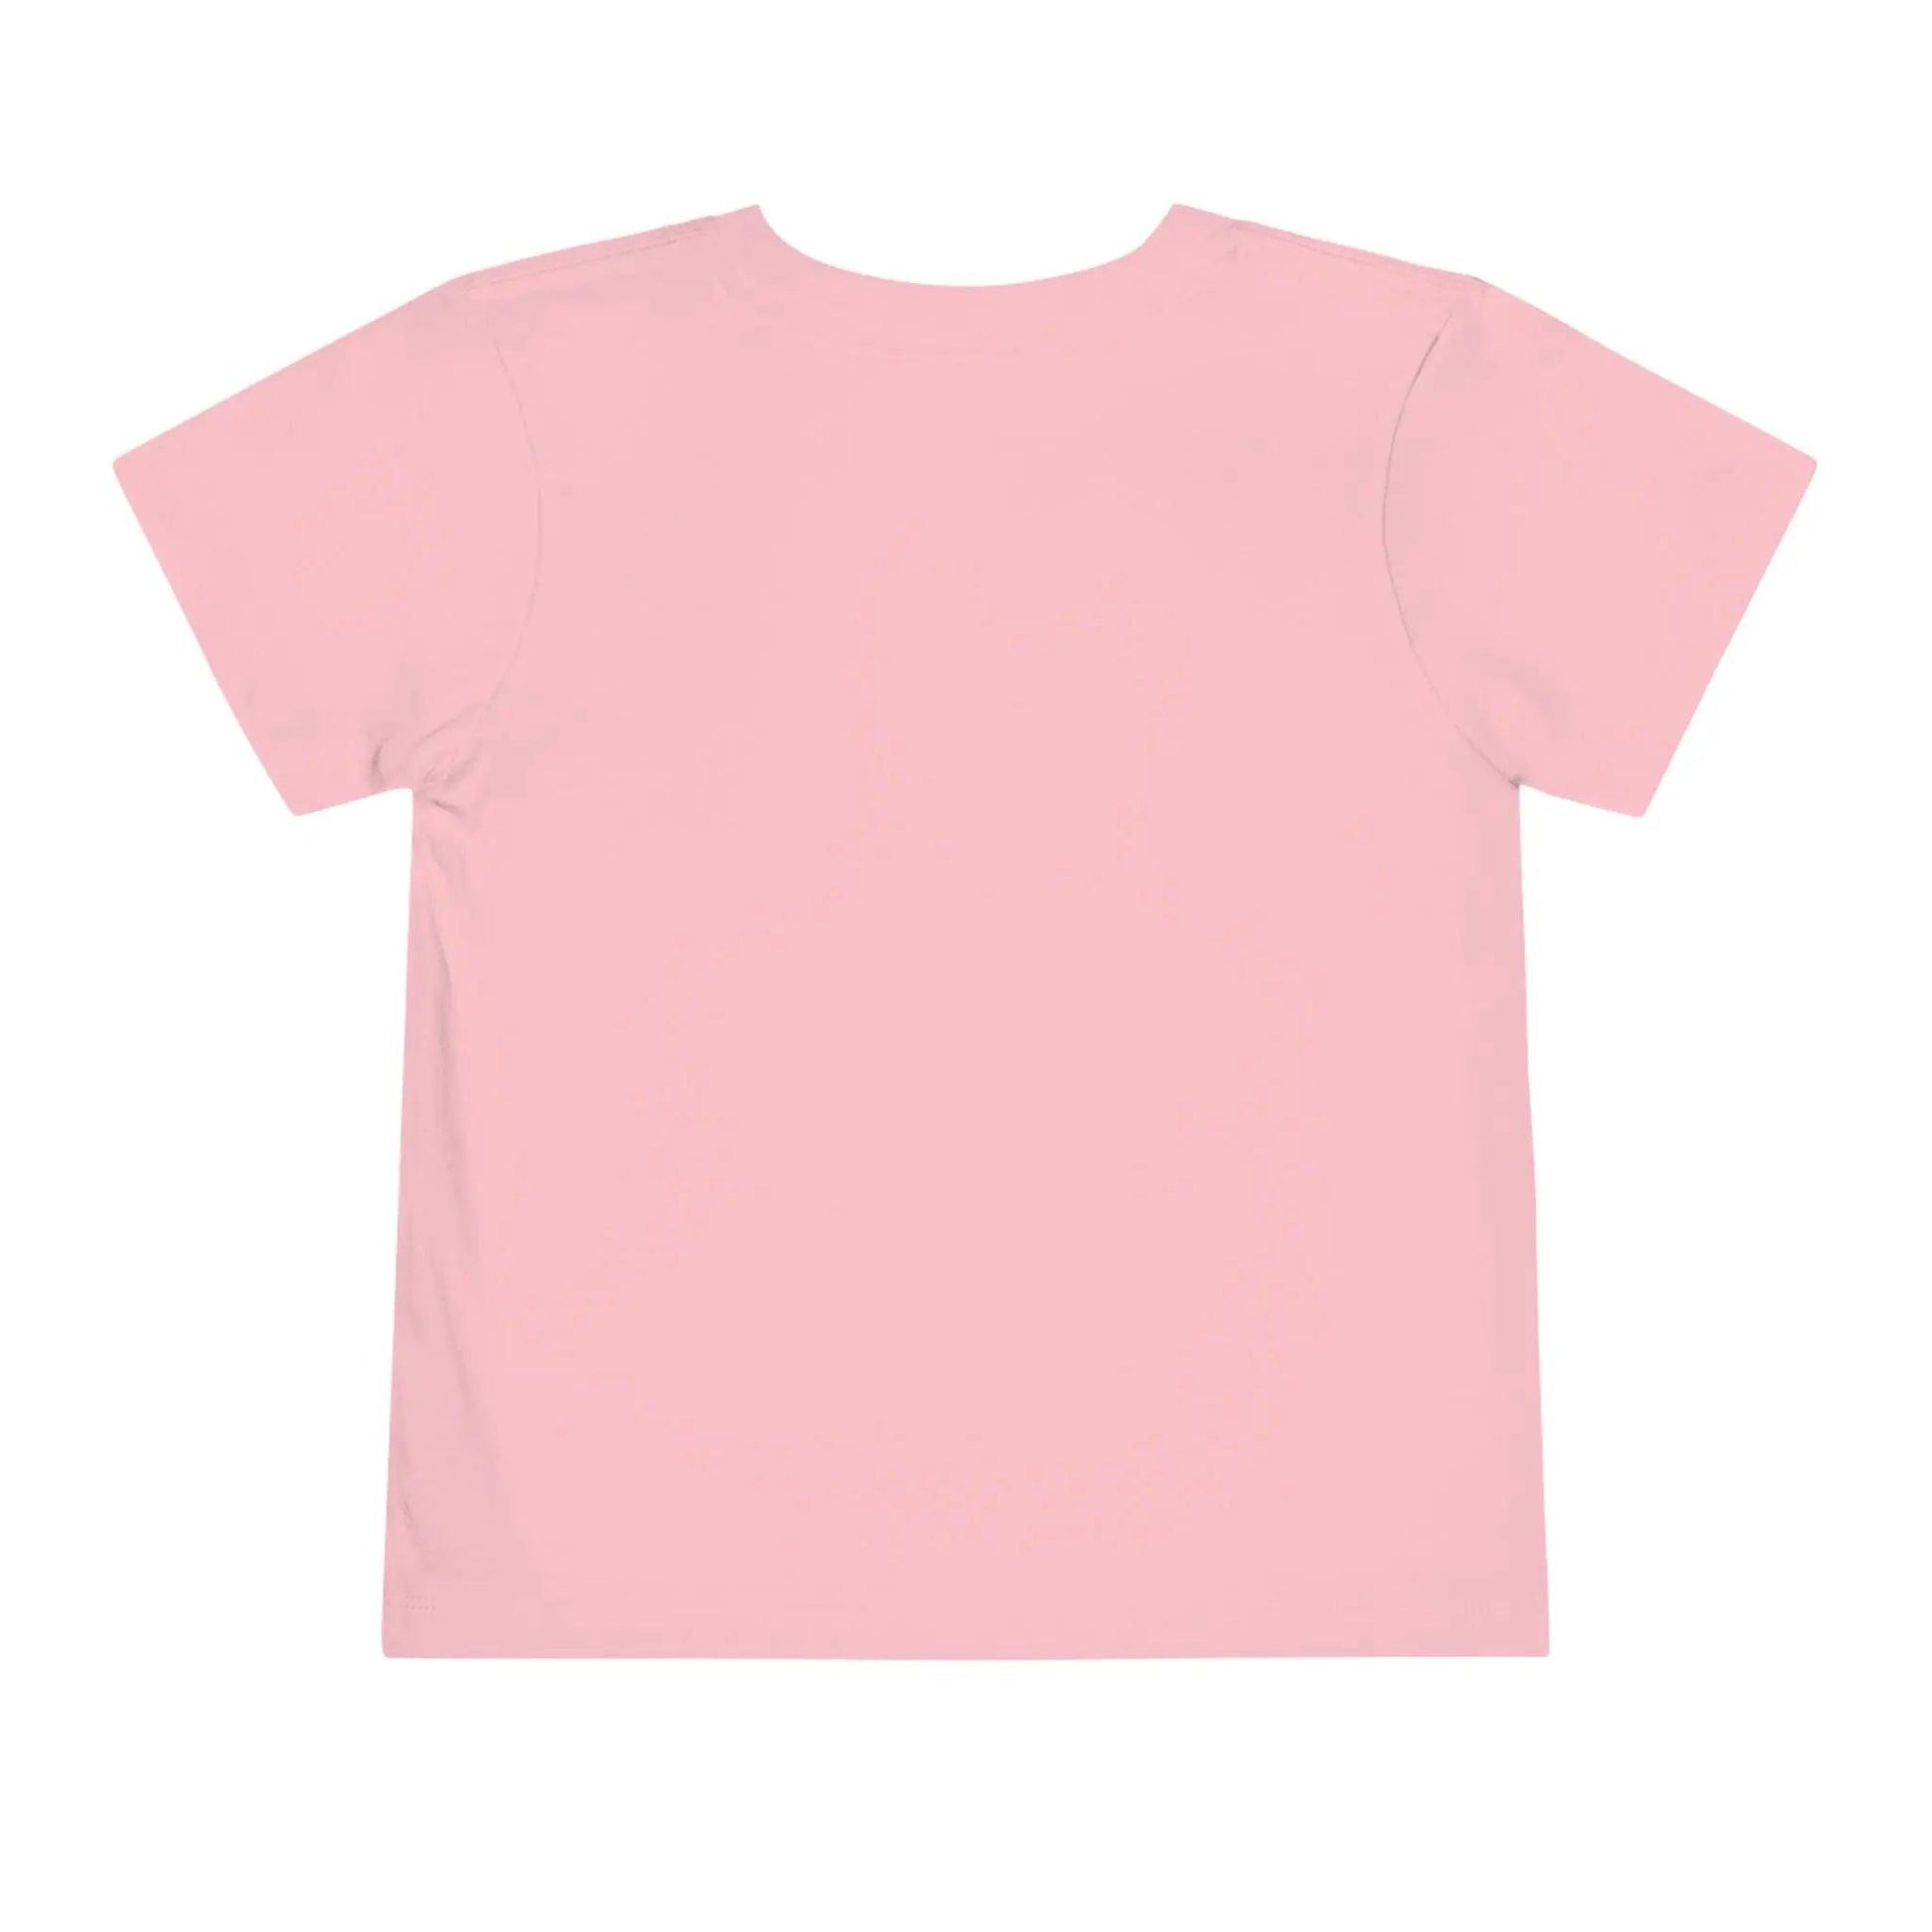 Toddler Short Sleeve Tee Kids clothes